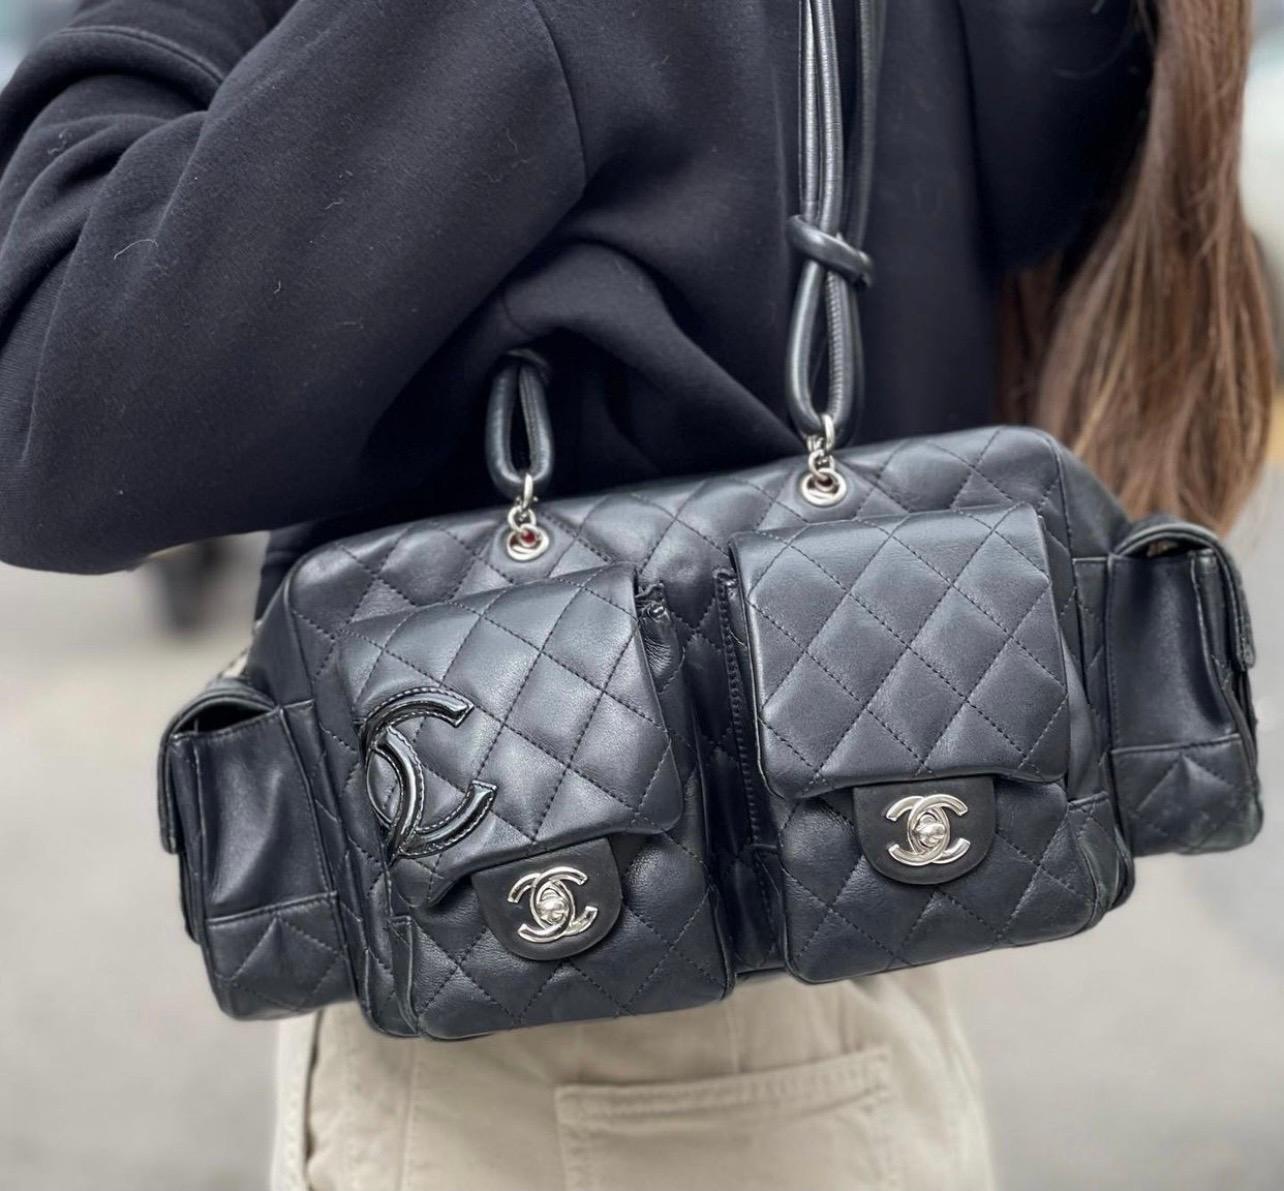 Chanel Black Leather Cambon Bag 2